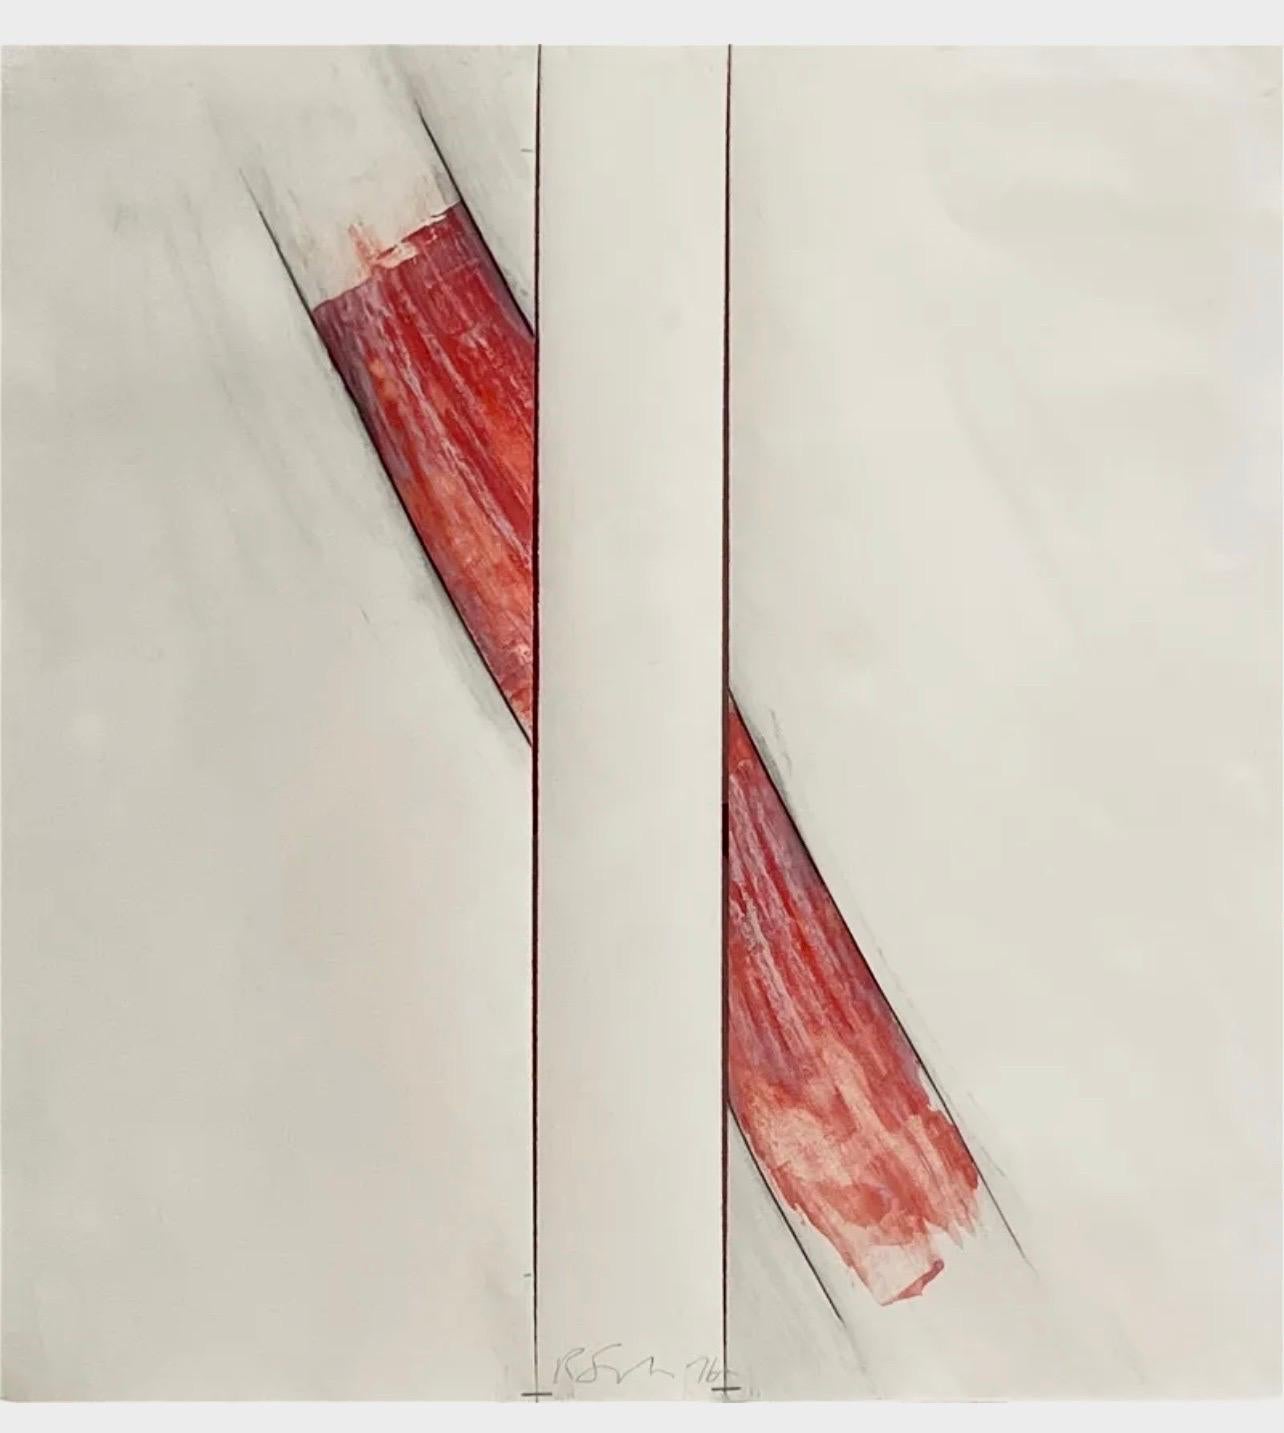 
Richard Smith, British (1931-2016)
Untitled (Abstract Composition) (1976)
Gouache, crayon, charcoal and metal staples on Arches paper
Hand signed lower center
sheet: 22 x 22 inches
frame dimensions: 32 3/4 x 31 3/4 x 1 5/8 inches, wood shadow box